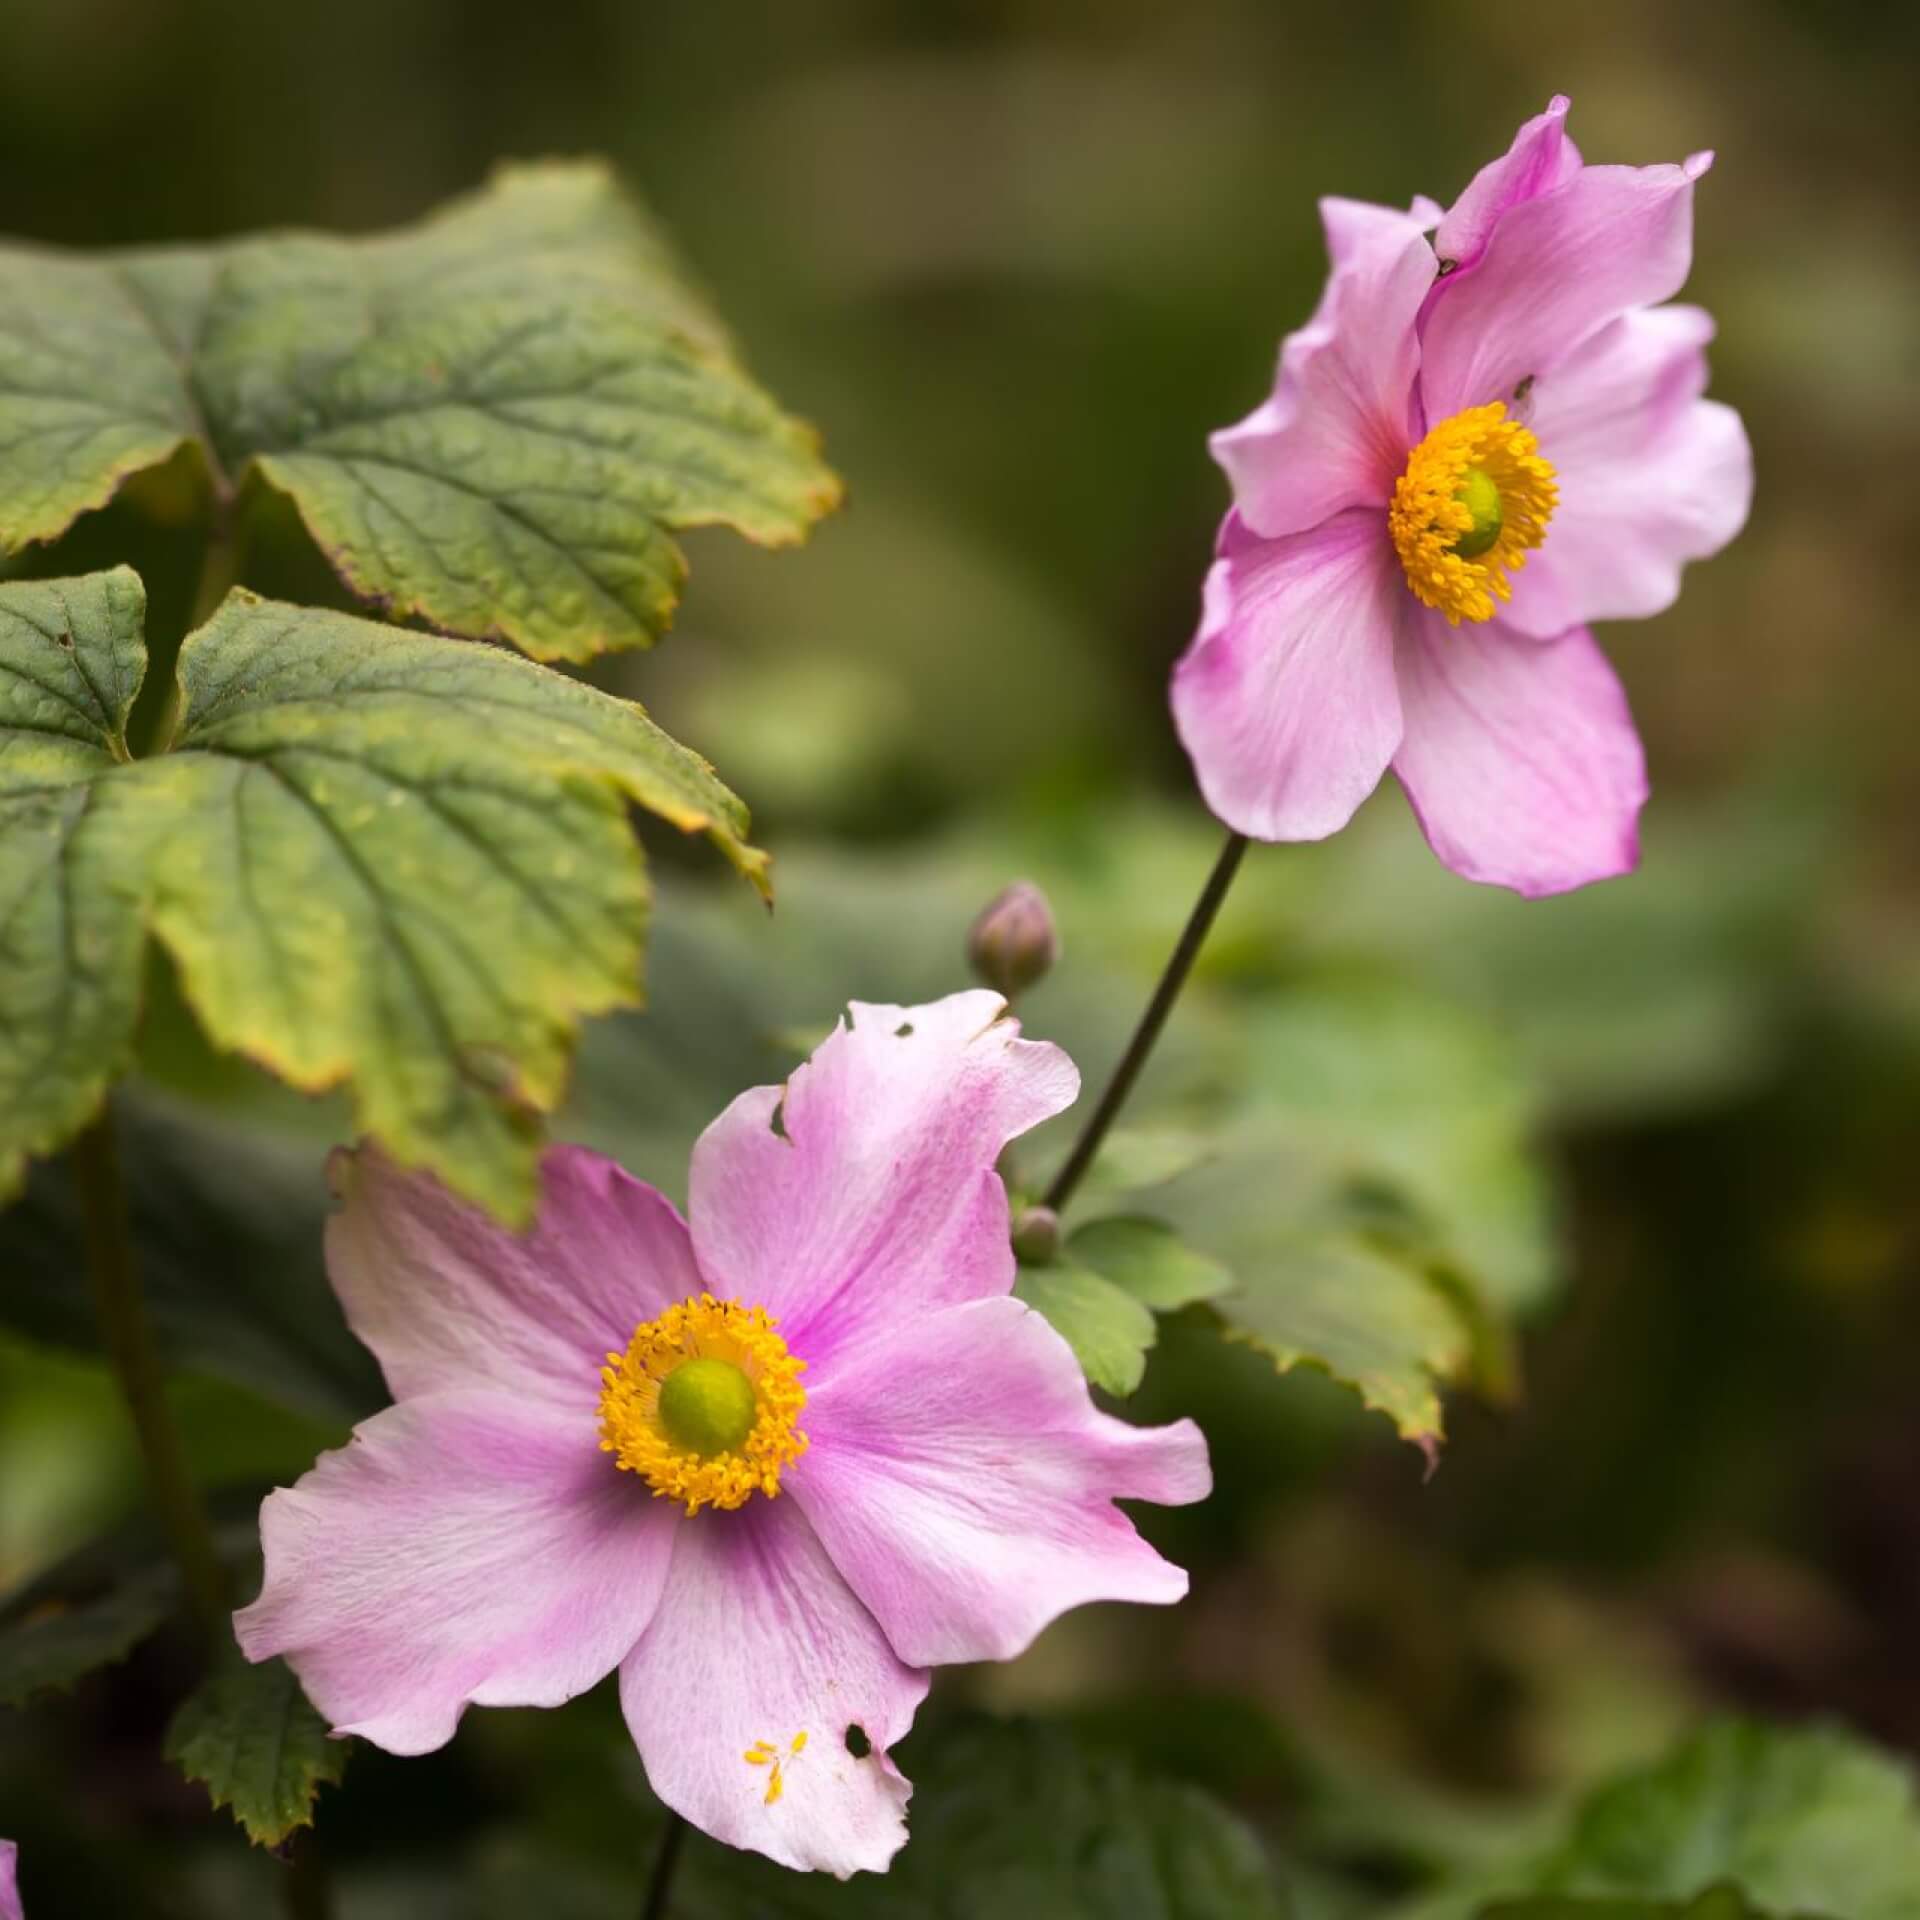 Herbst-Anemone 'Pink Saucer' (Anemone japonica 'Pink Saucer')